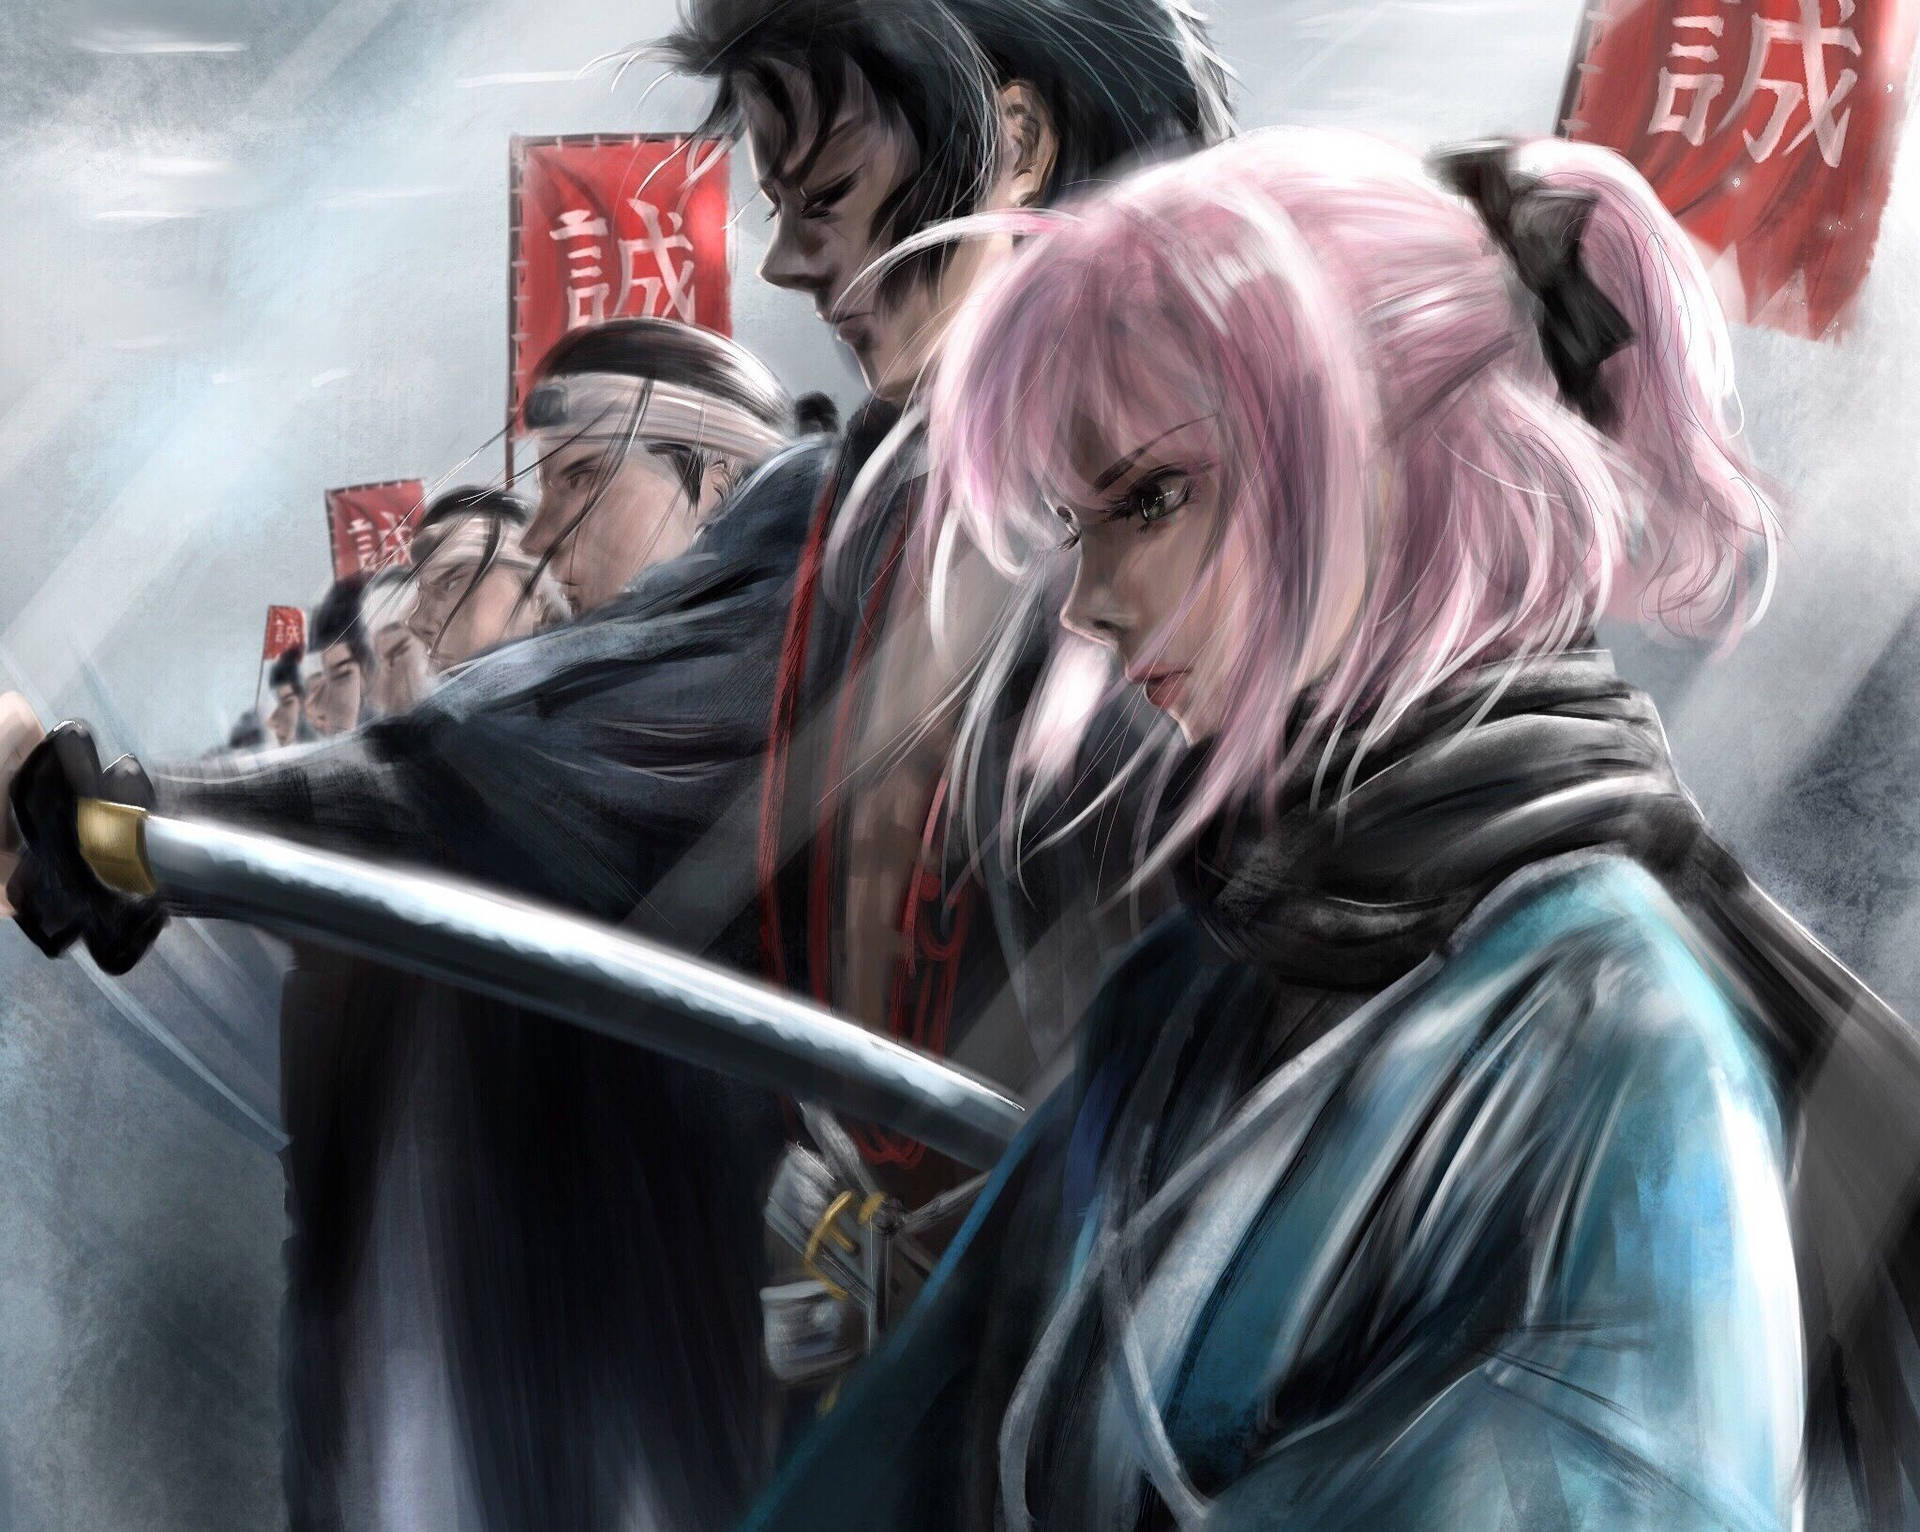 A Group Of People With Swords And Pink Hair Background